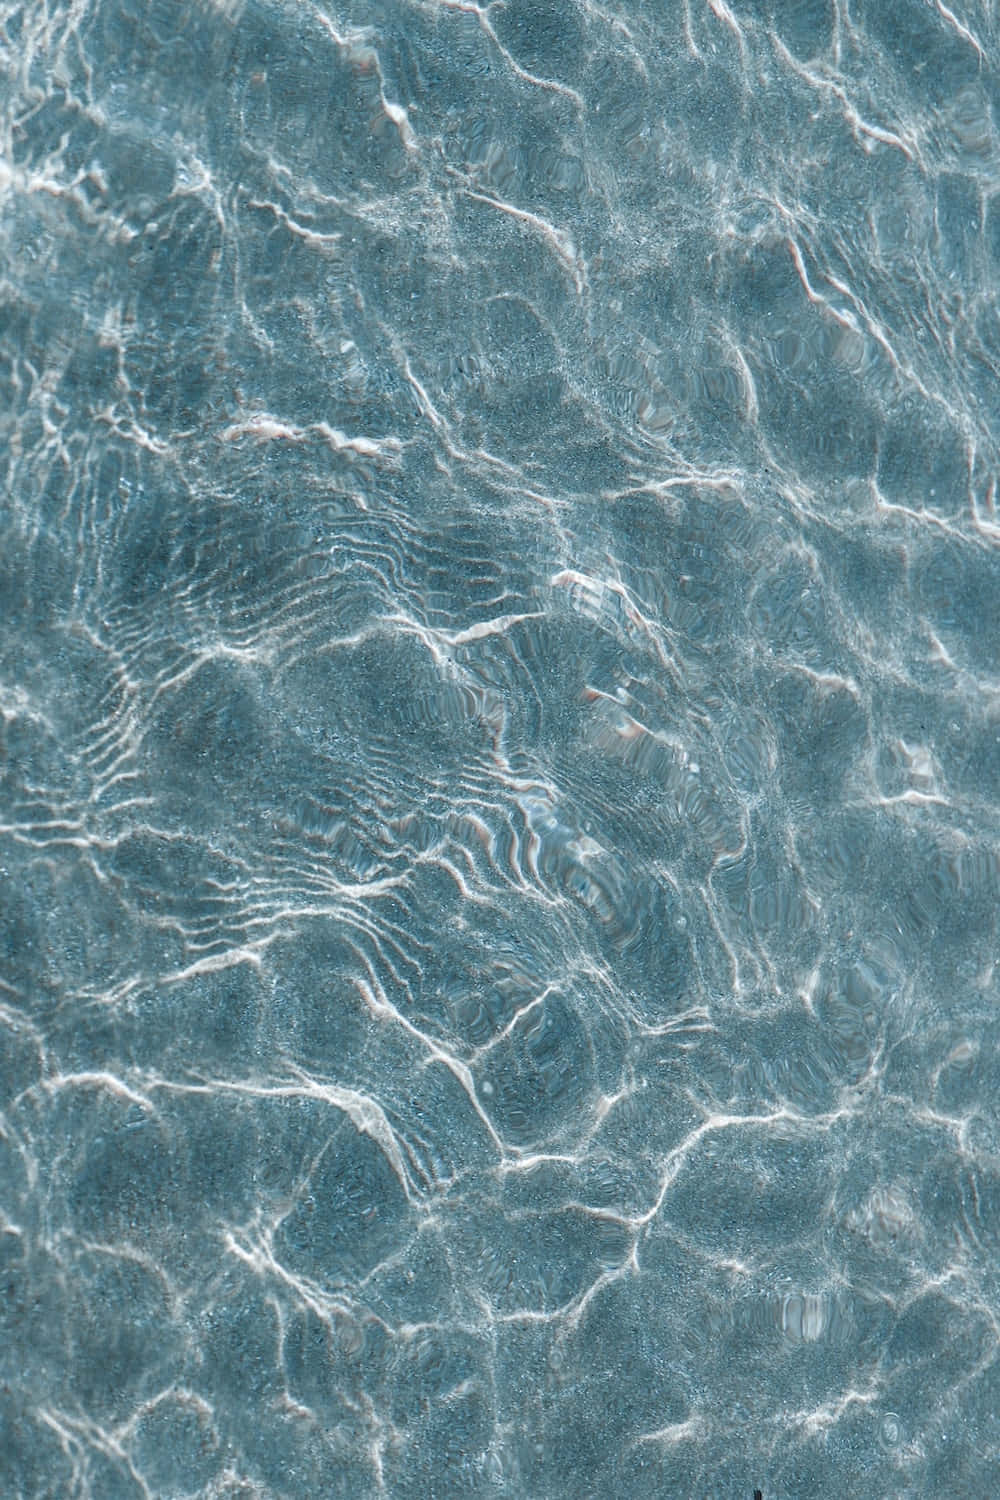 "A close-up of a peaceful, still body of water revealing its intricate texture"